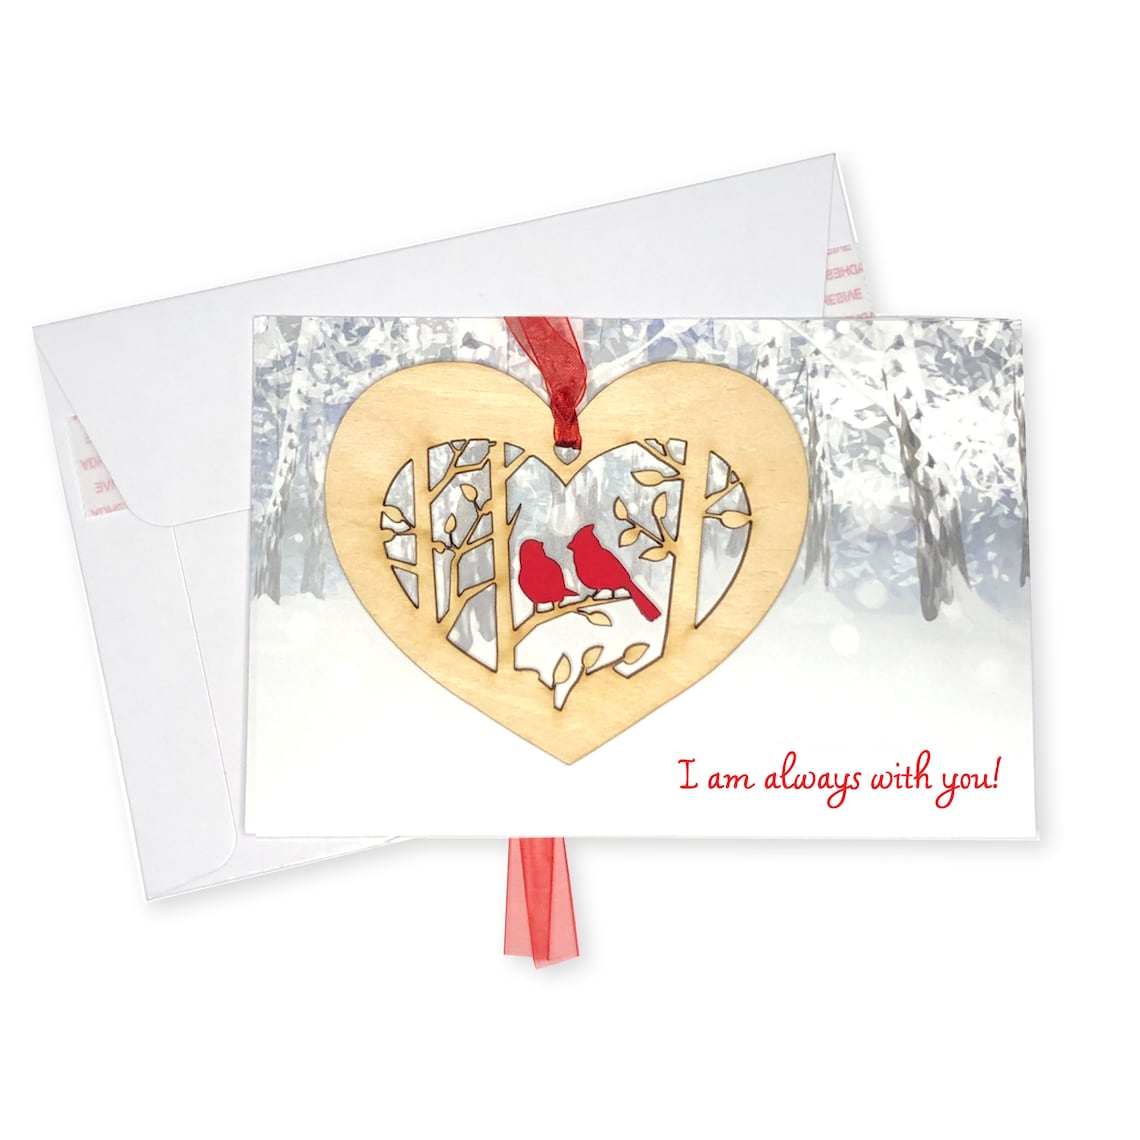 Cards: A Wooden Cardinal Ornament with Card I Am Always with You